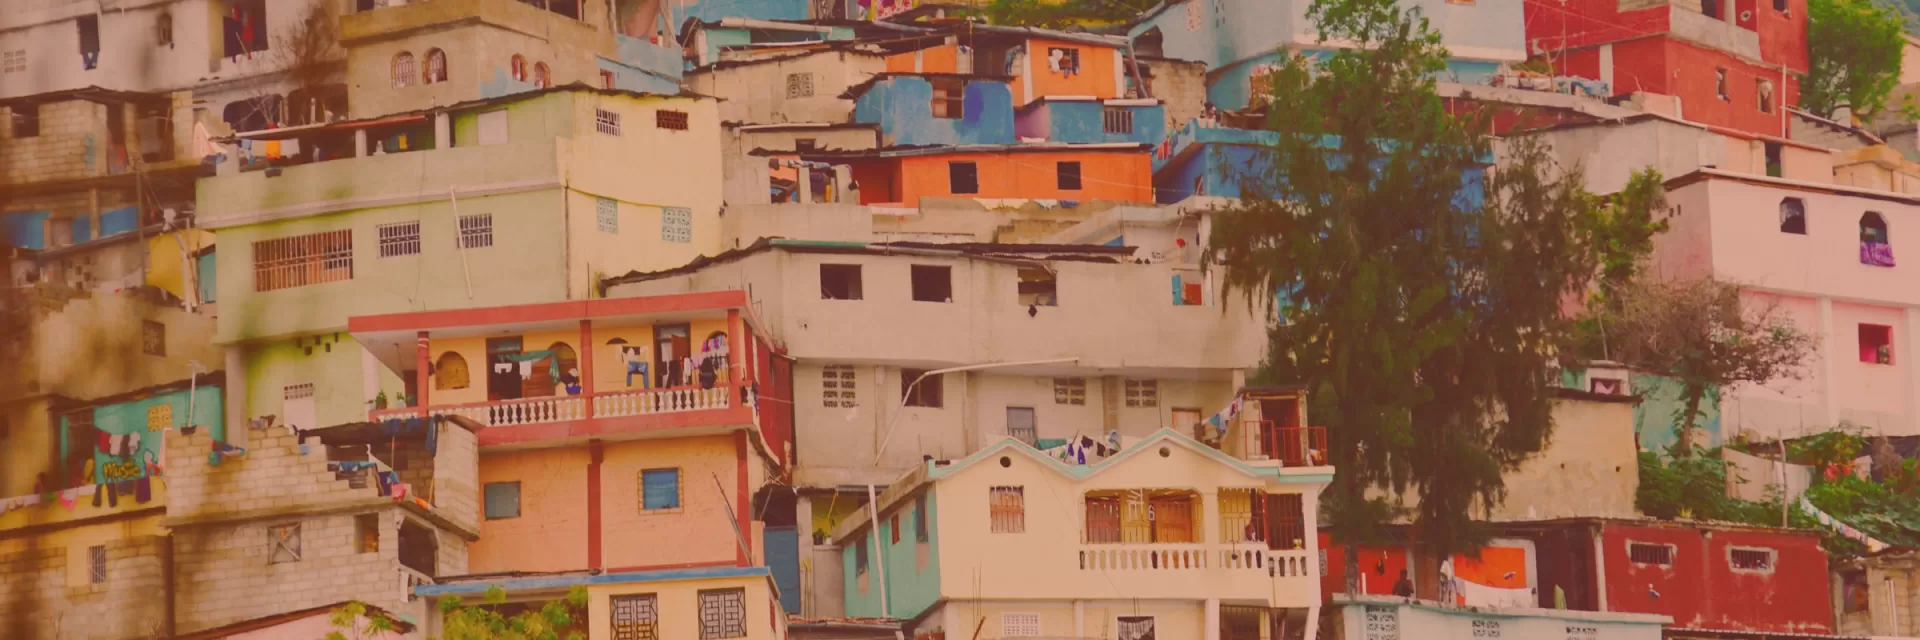 Brightly colored houses on a hillside.